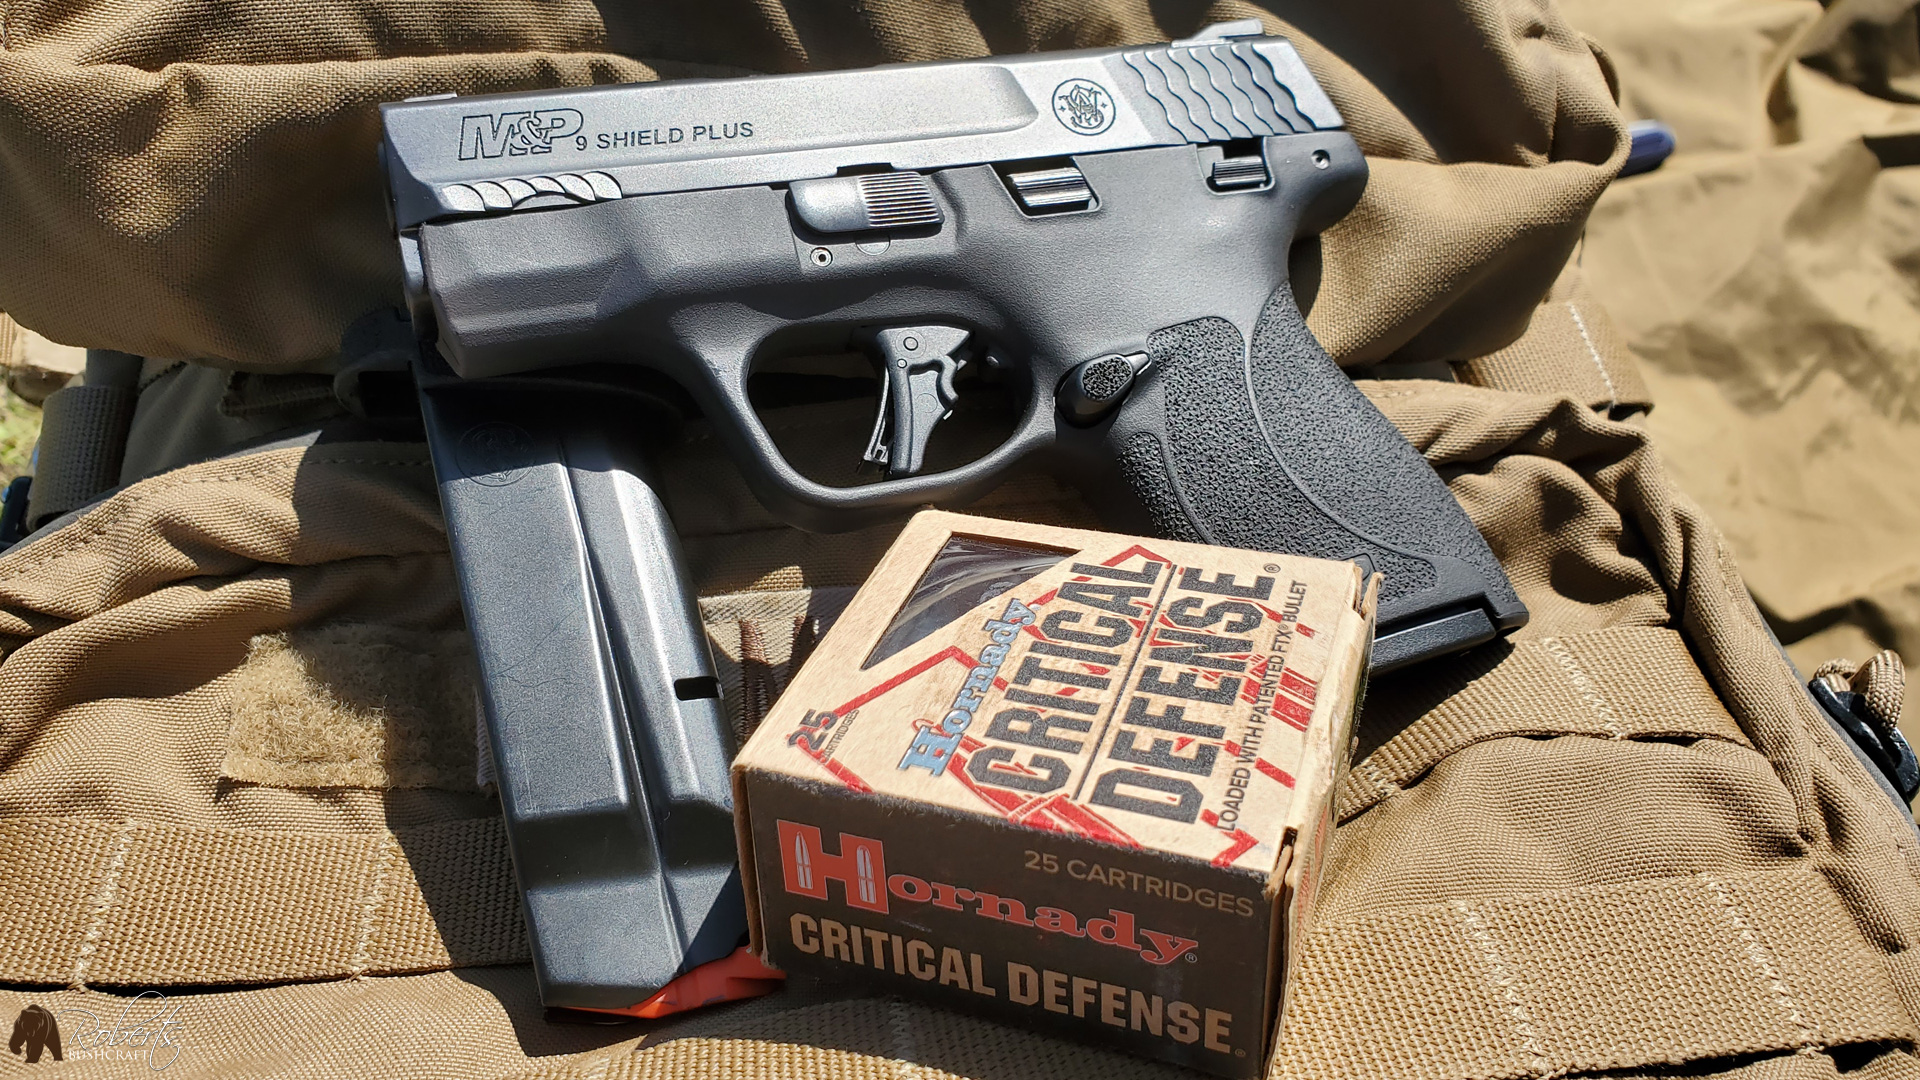 Smith & Wesson Shield Plus 9mm